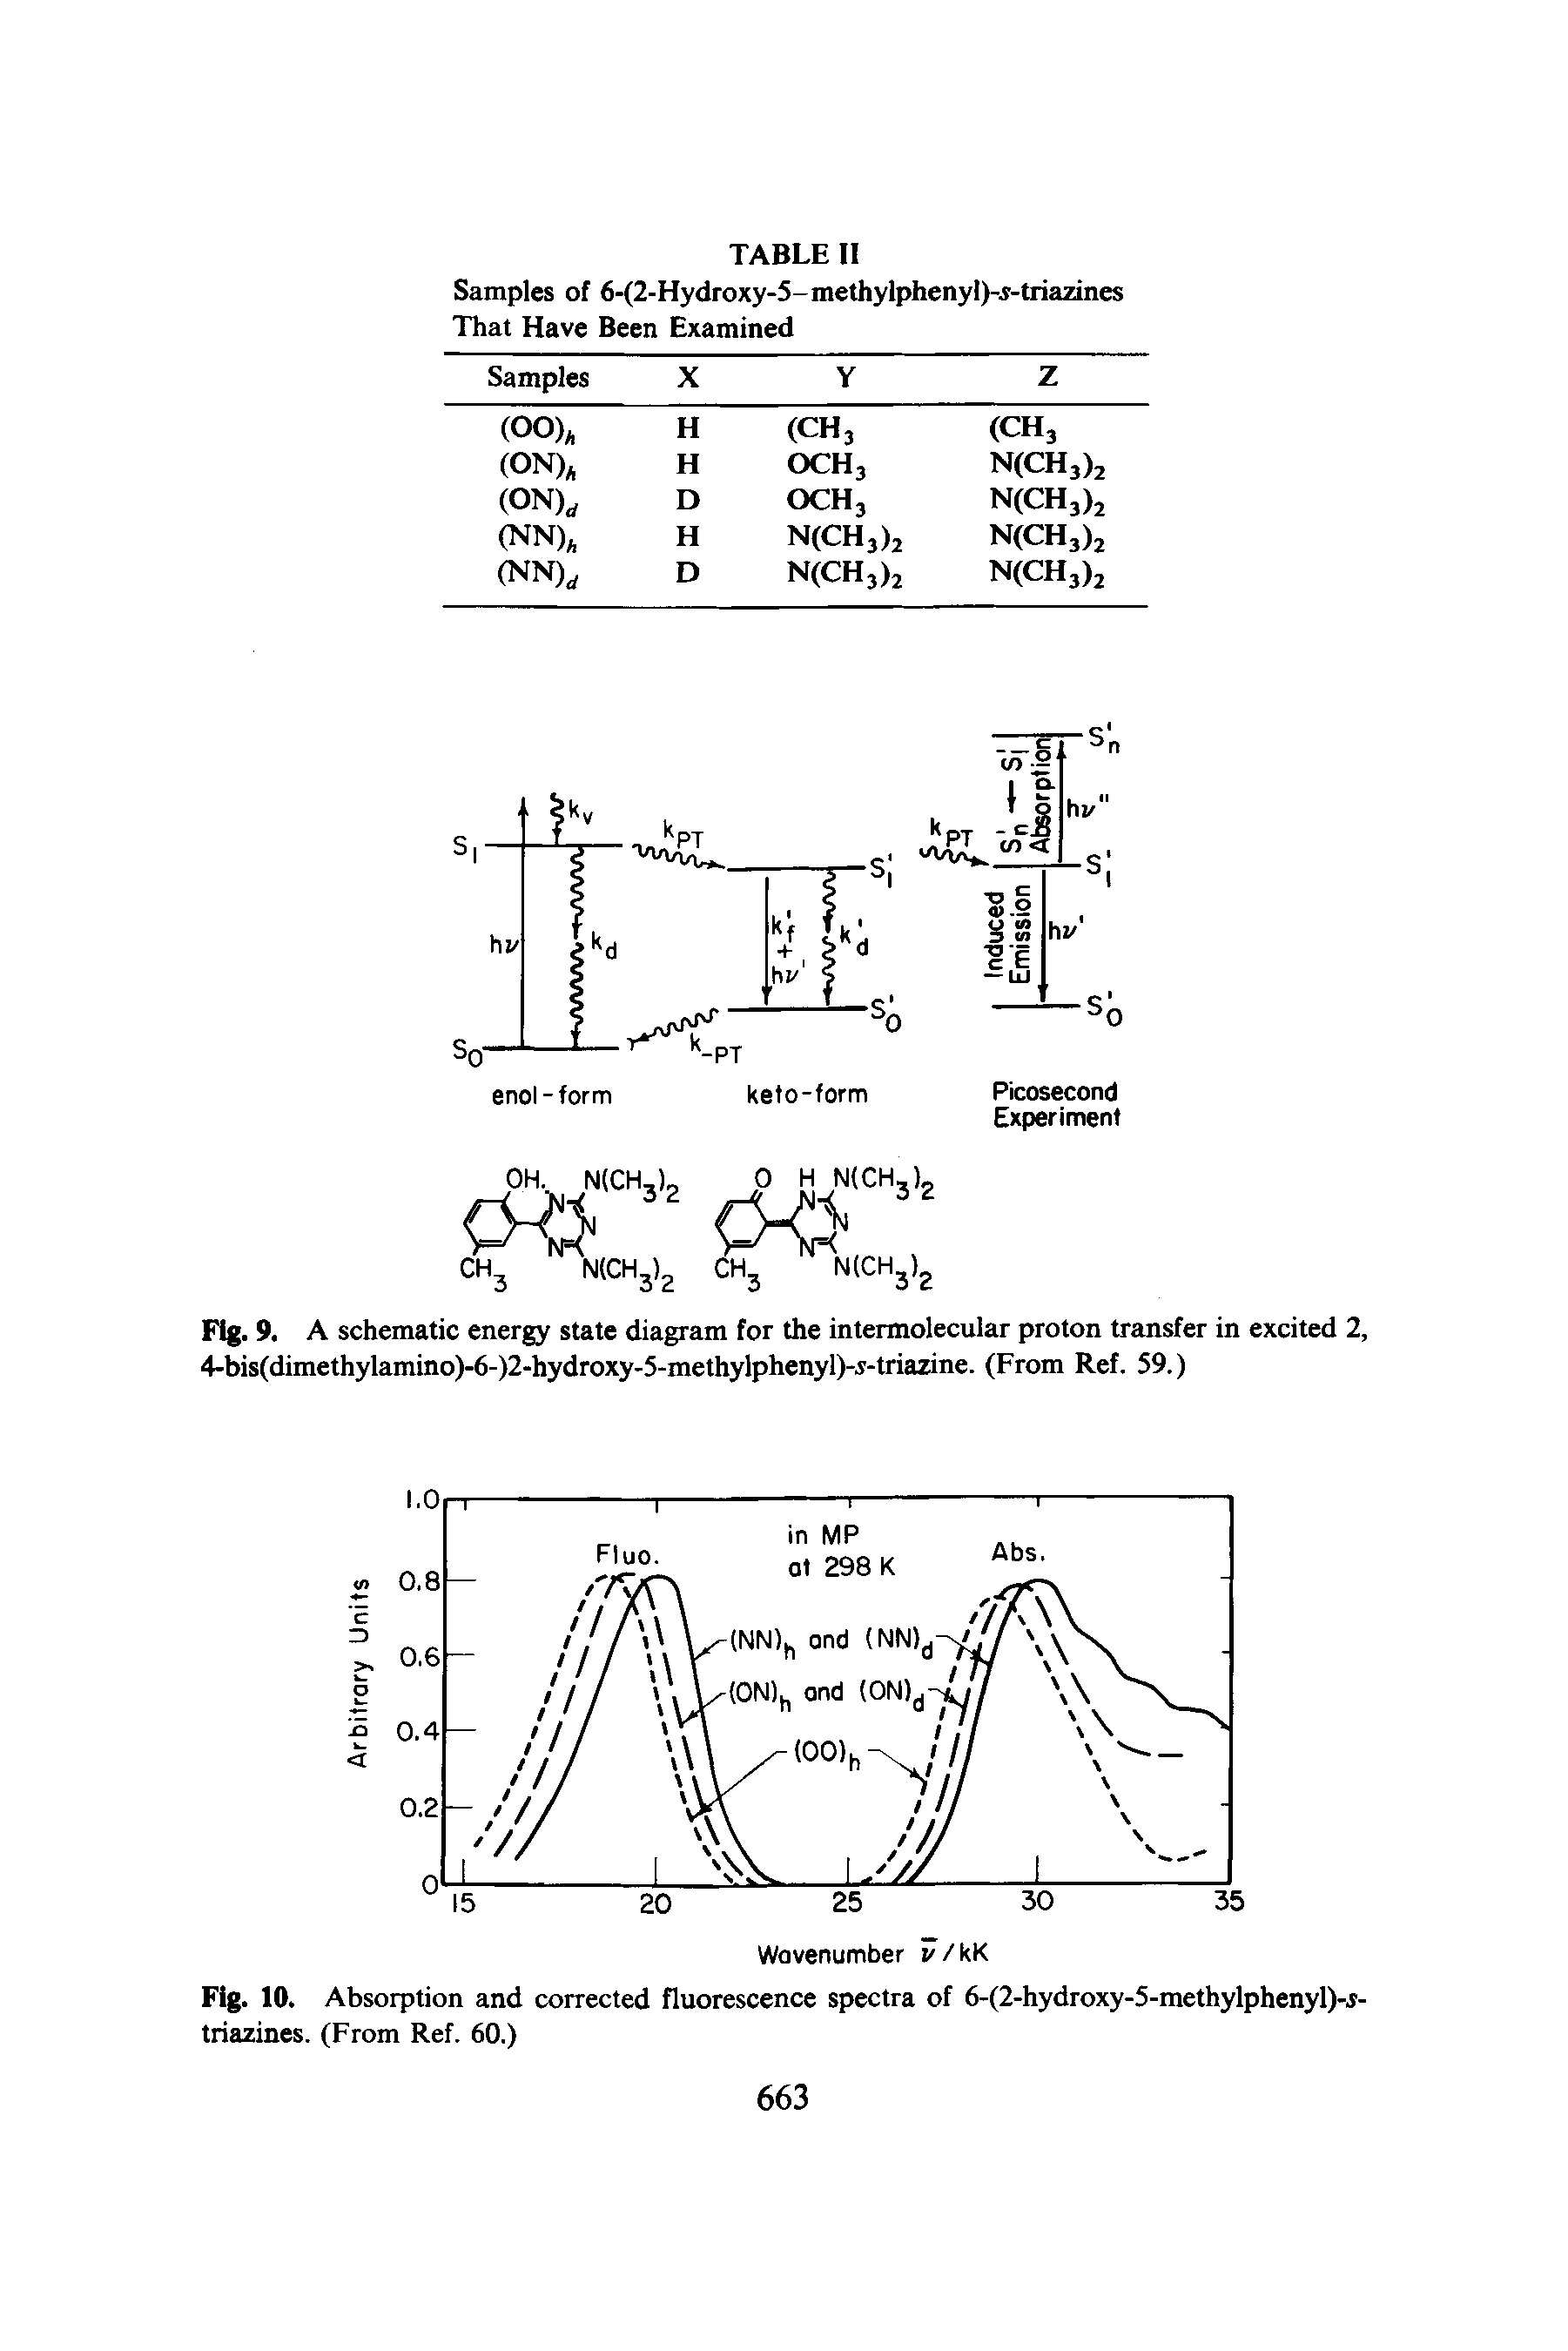 Fig. 9. A schematic energy state diagram for the intermolecular proton transfer in excited 2,...